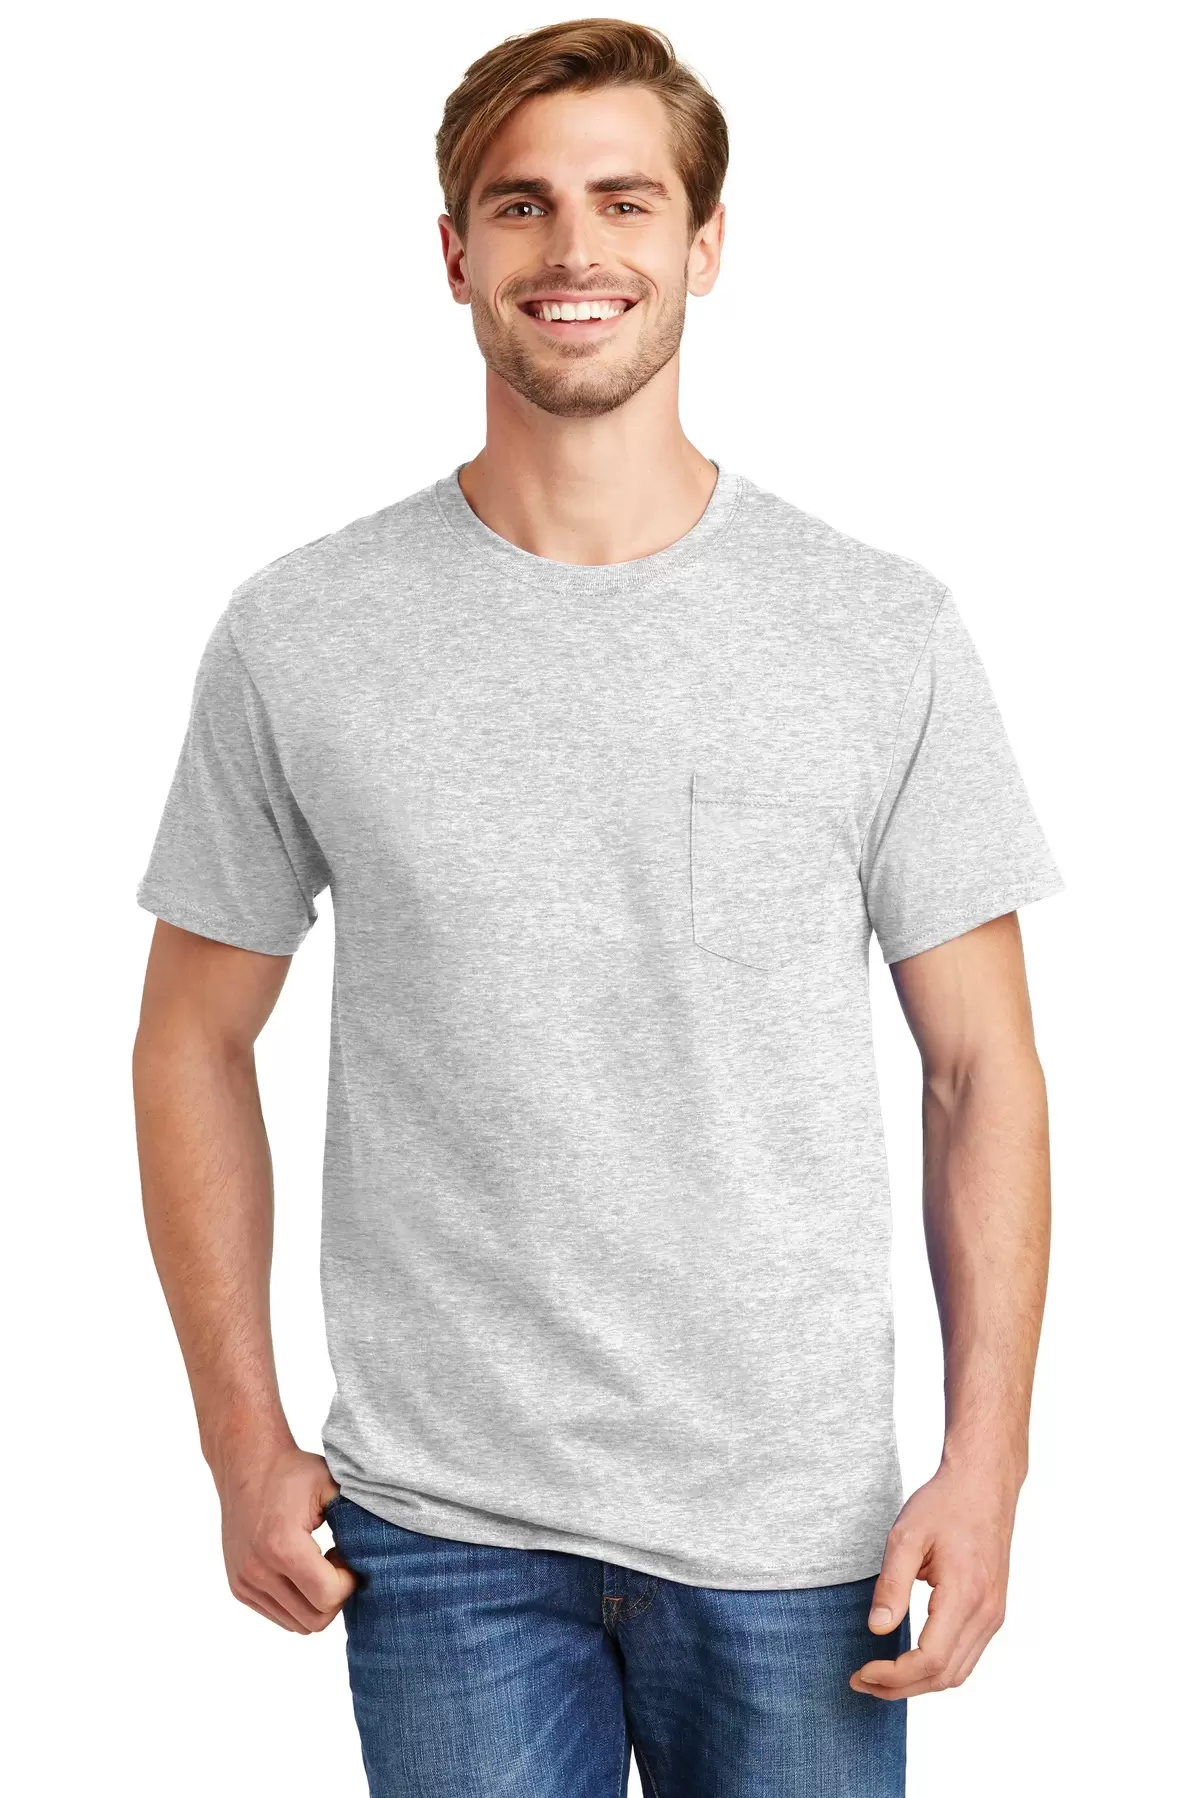 In Search of Hanes Premium Tagless A-Shirts